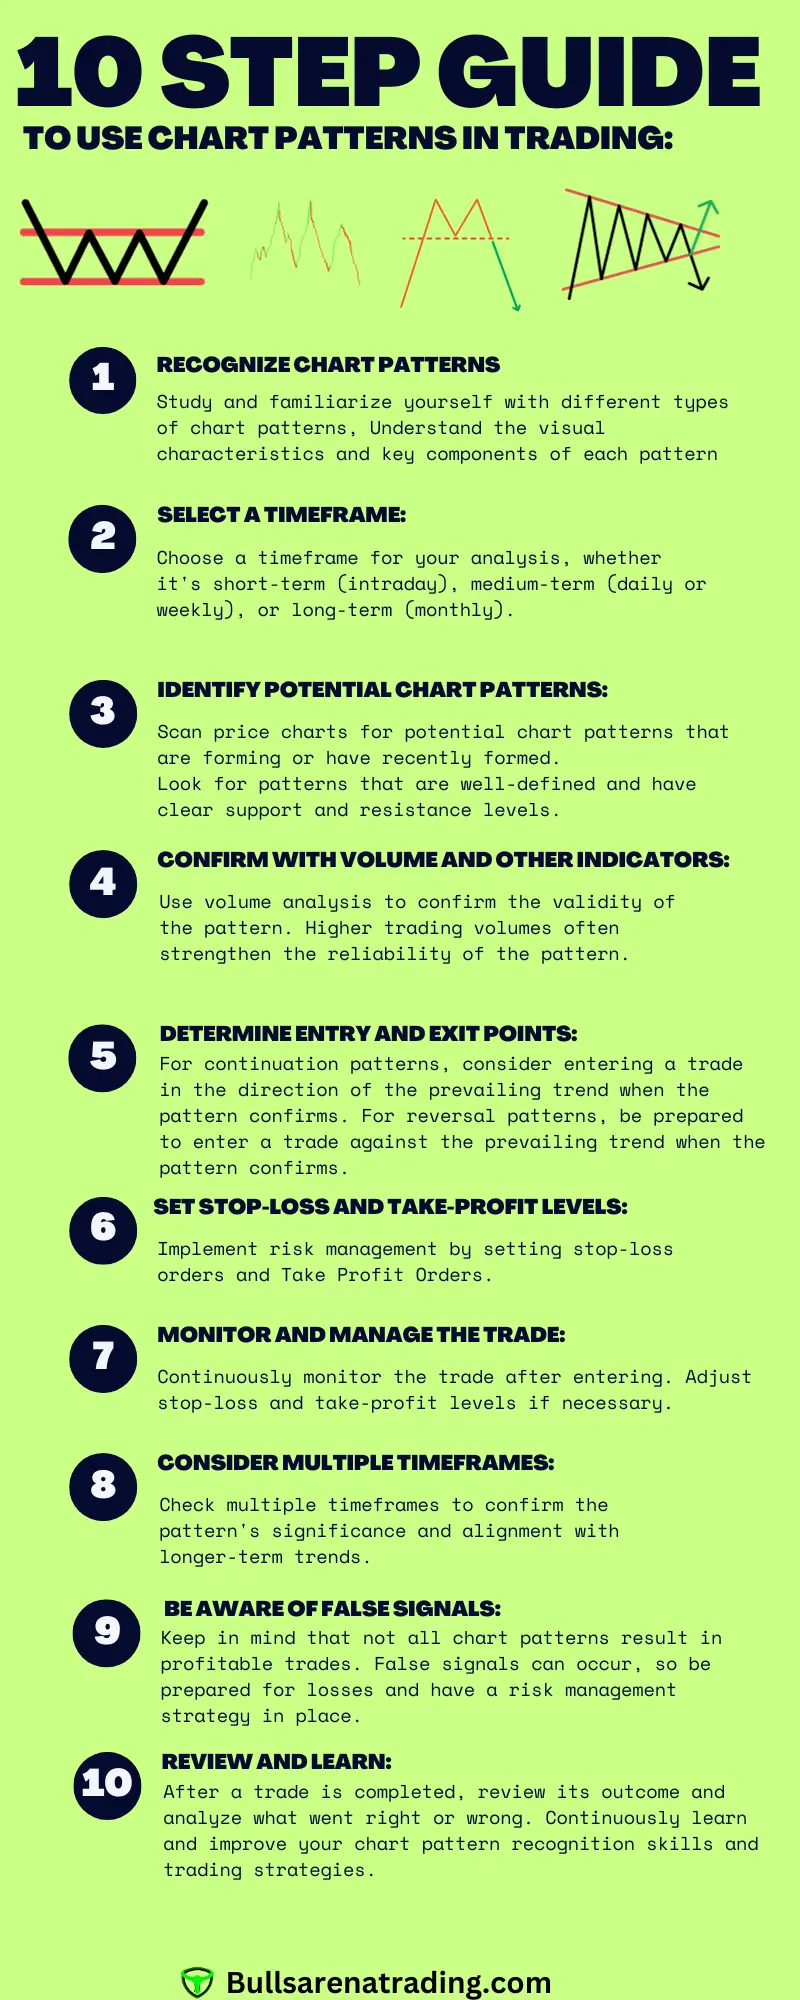 How To Use Chart Patterns in Trading